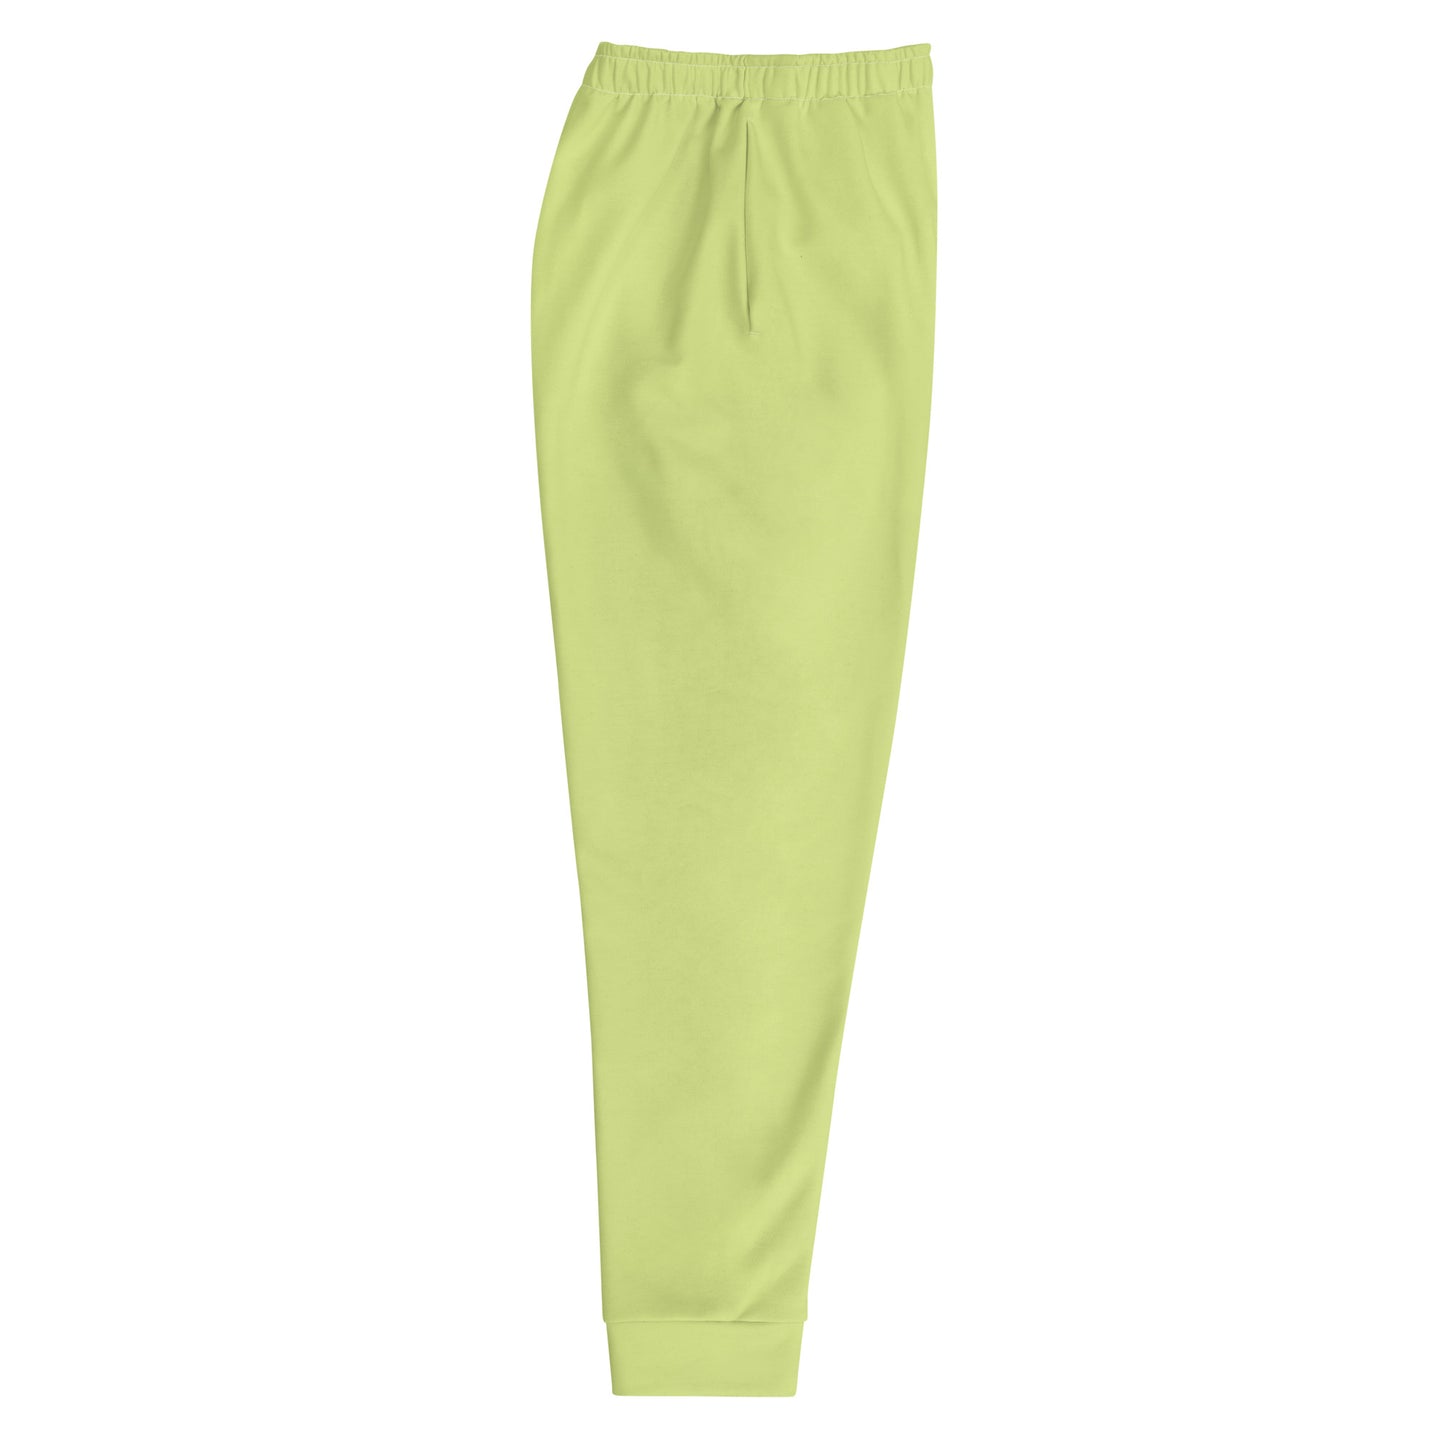 Lime Climate Change Global Warming Statement - Sustainably Made Men's Jogger